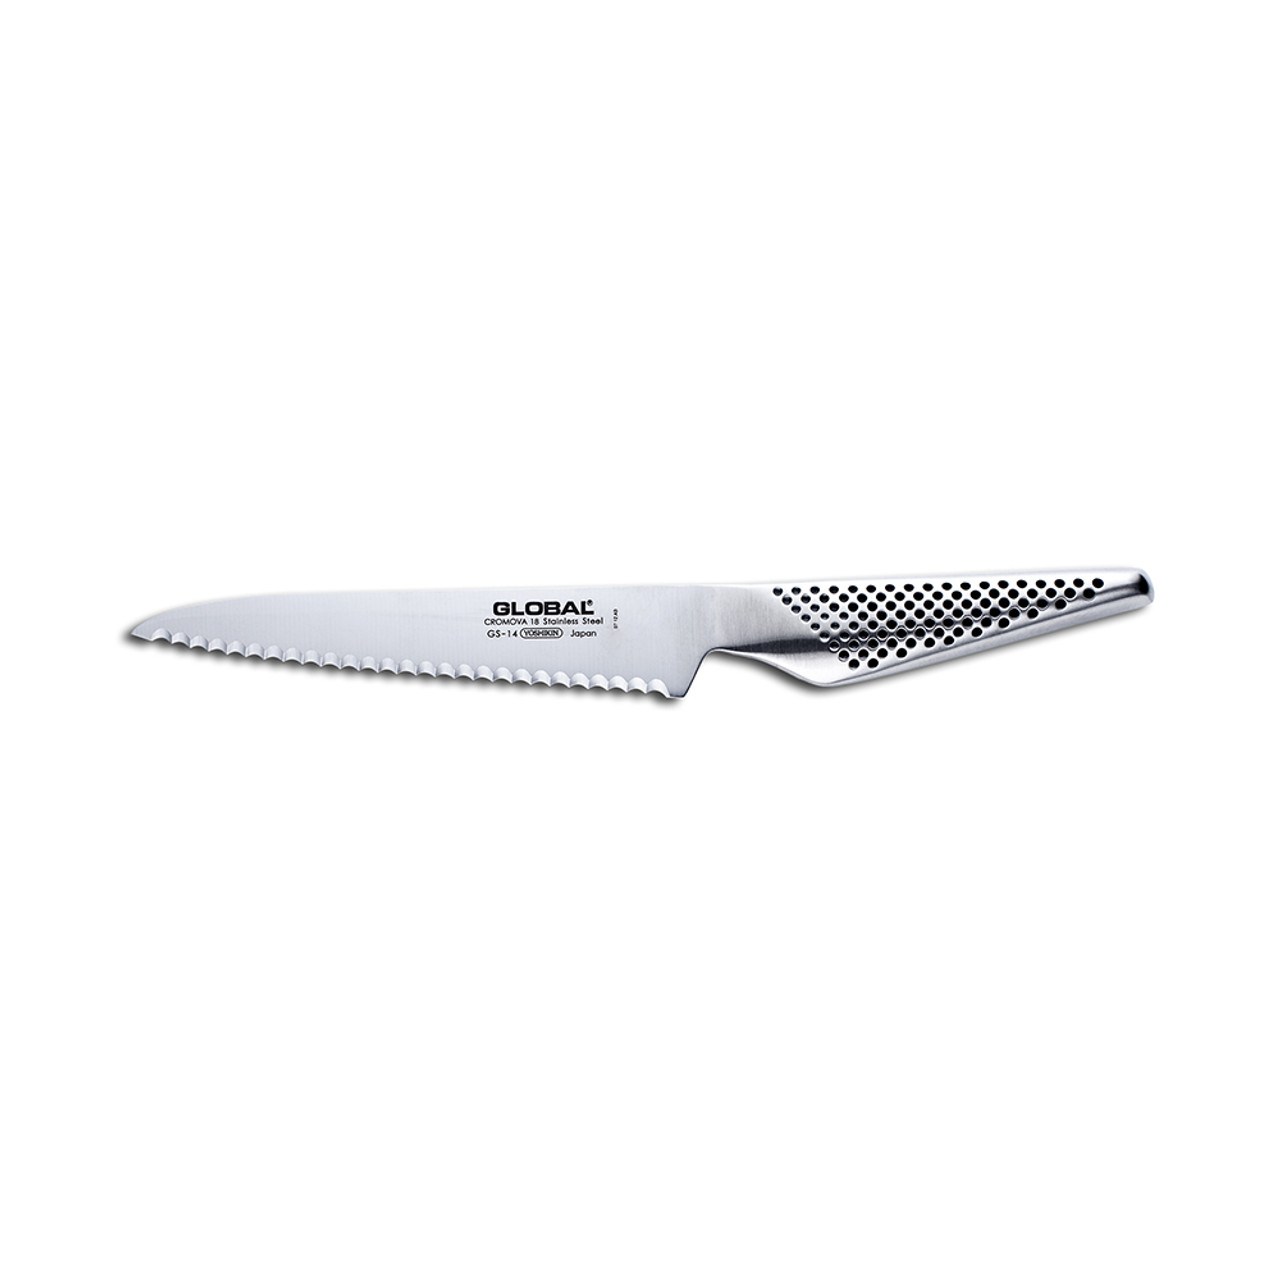 https://cdn11.bigcommerce.com/s-hccytny0od/images/stencil/1280x1280/products/308/4118/global-classic-6-inch_serrated-utility-knife__87447.1583245185.jpg?c=2?imbypass=on